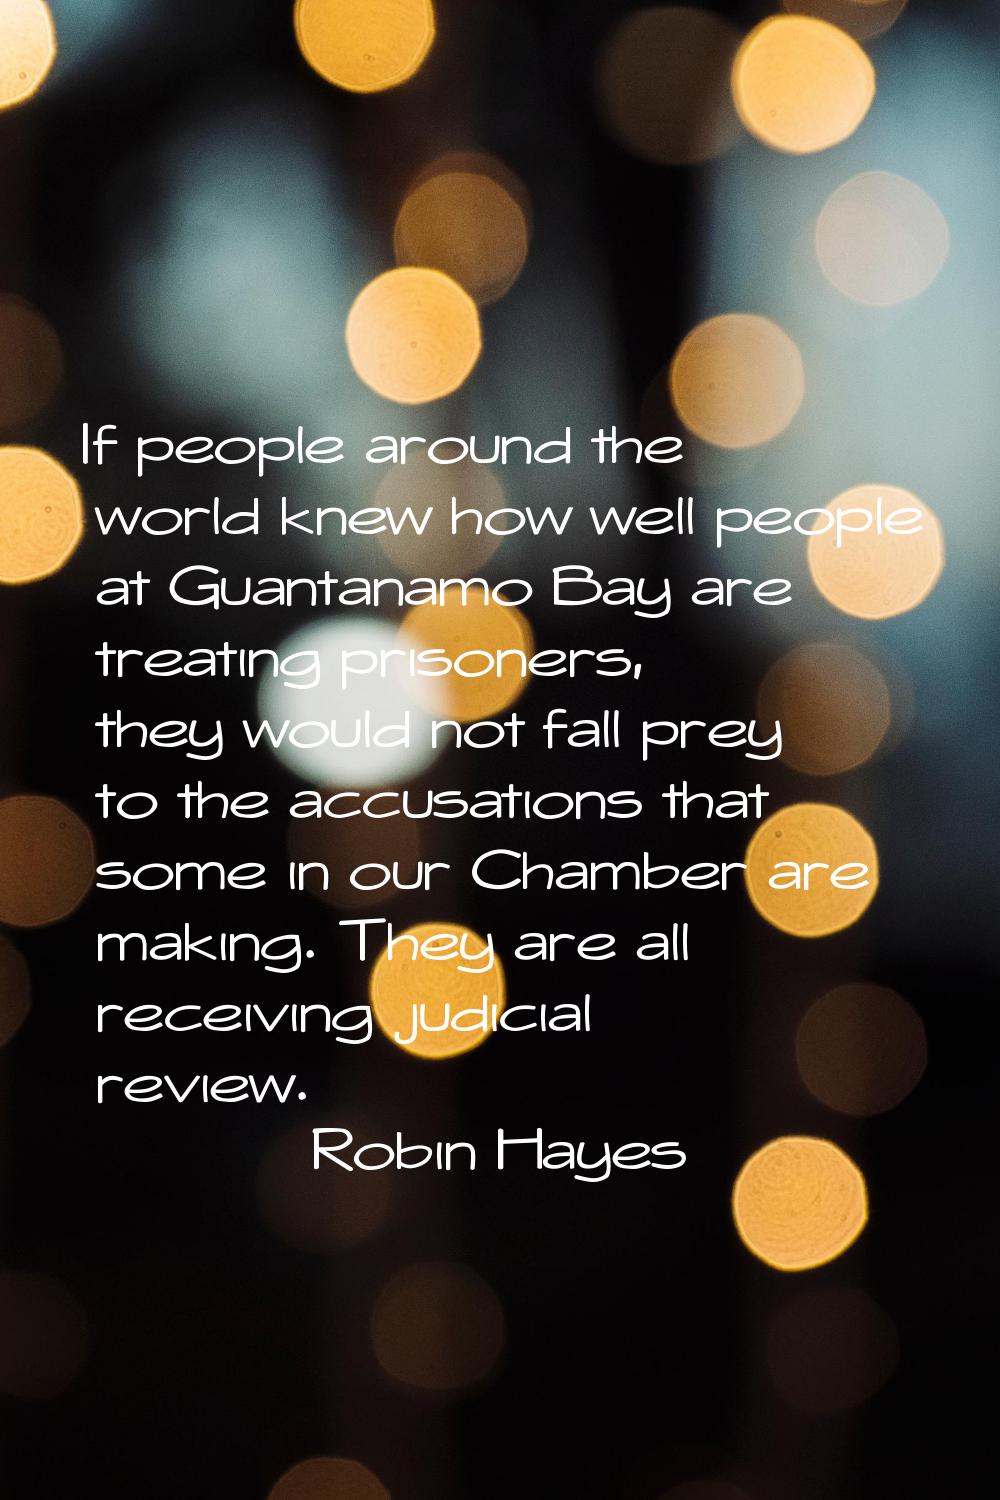 If people around the world knew how well people at Guantanamo Bay are treating prisoners, they woul